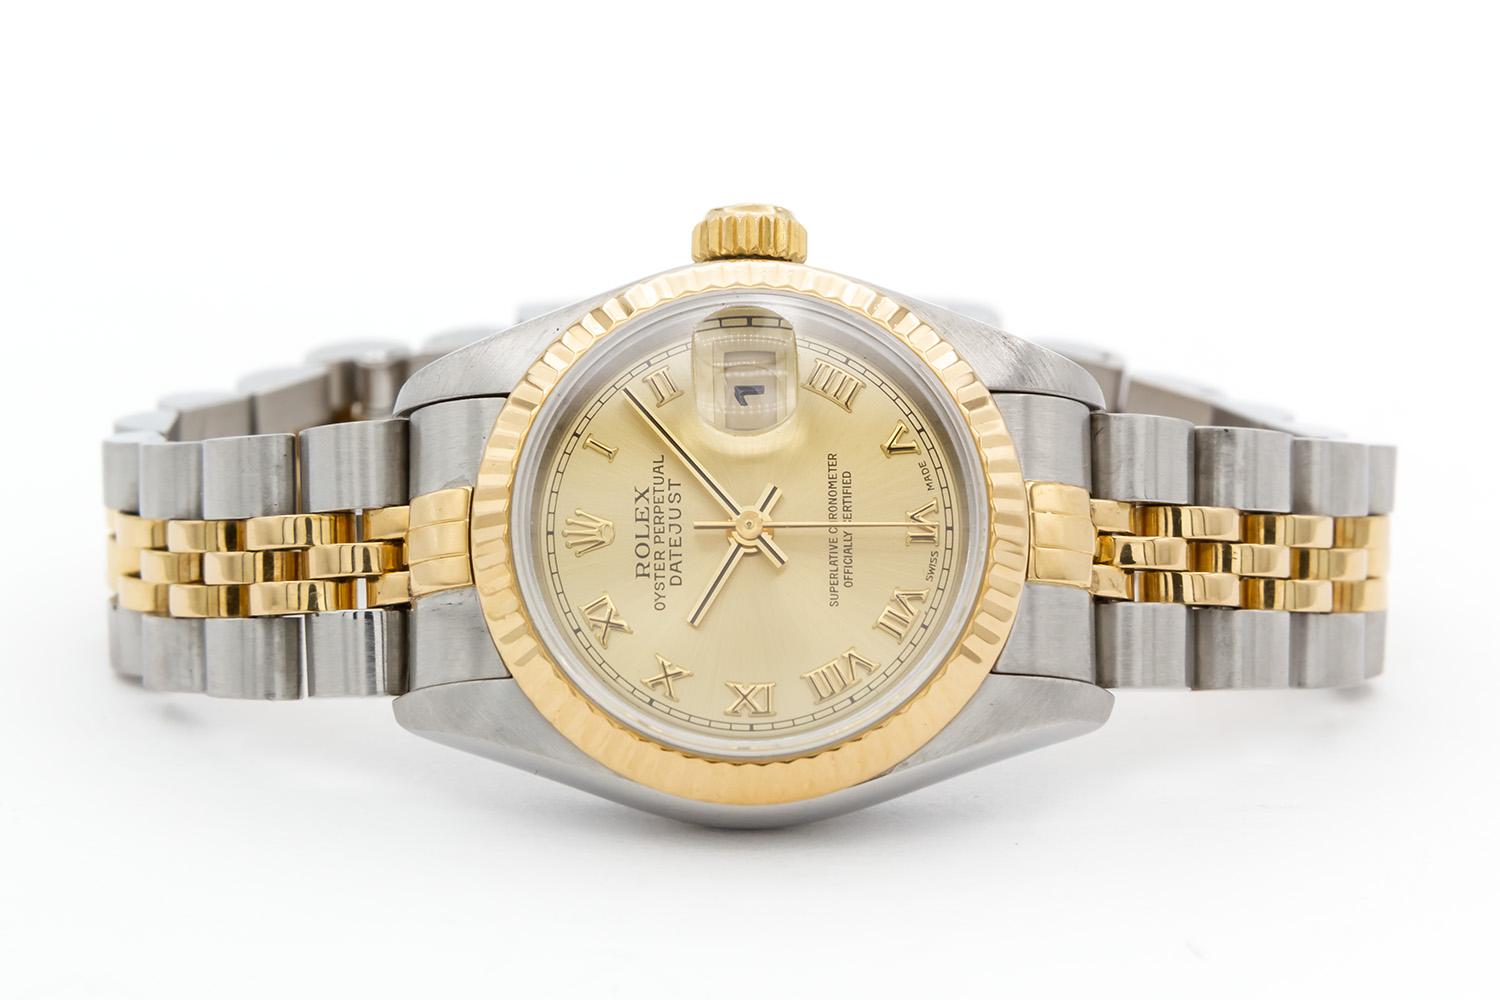 We are pleased to offer this 1993 Rolex Ladies Two Tone Datejust 69173. This is a classic ladies watch, timeless in its design. It features a 26mm stainless steel case, 18k yellow gold fluted bezel, champagne roman dial and two tone stainless steel